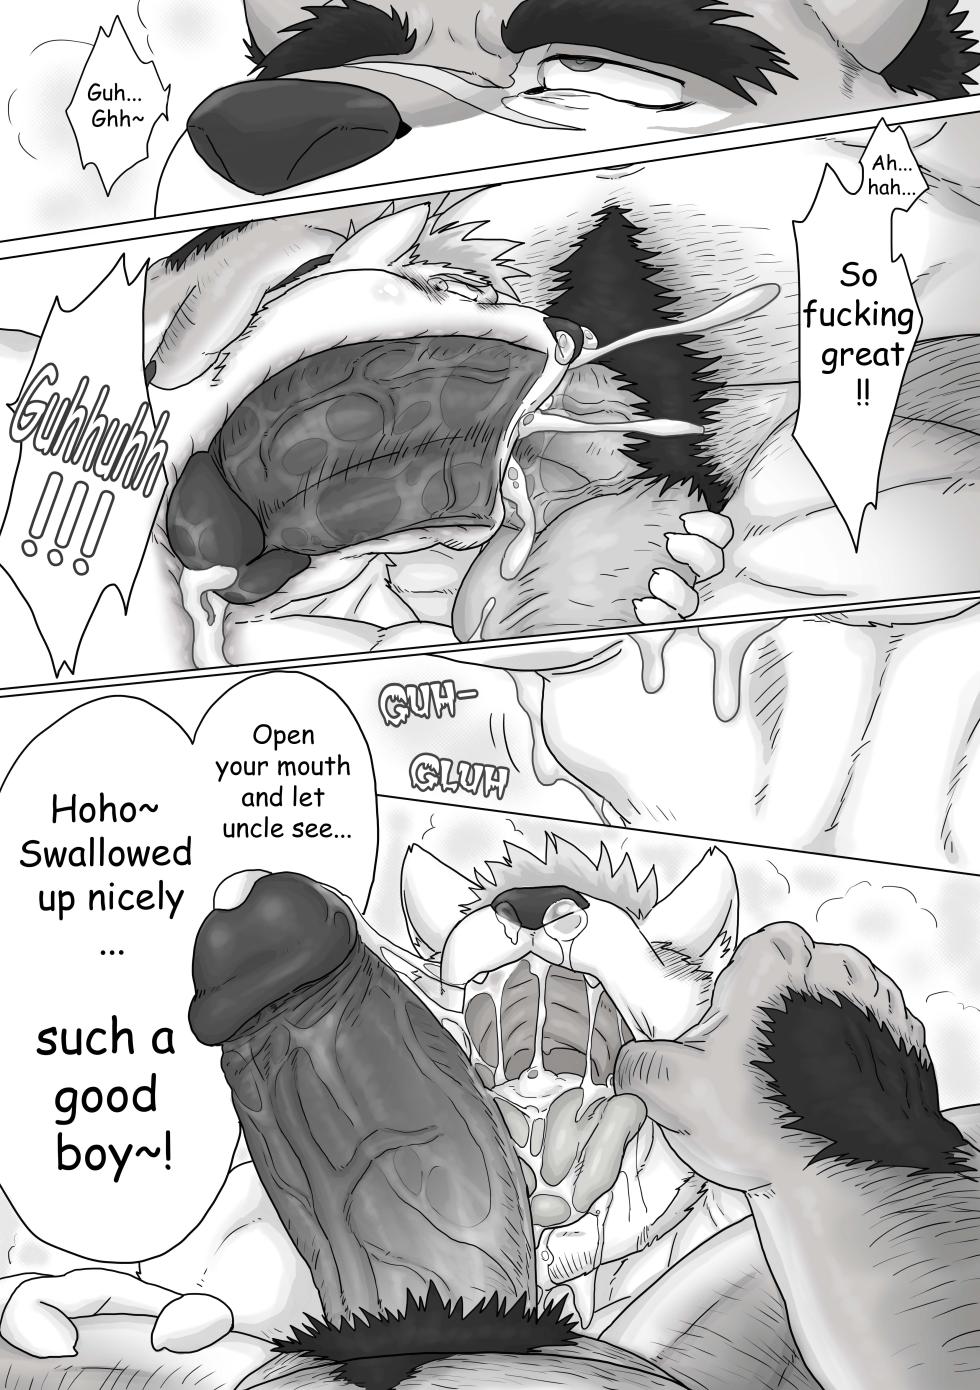 [Renoky] My hometown‘s uncle is a Horny Hung!! [English] [Decensored] [Digital] - Page 22